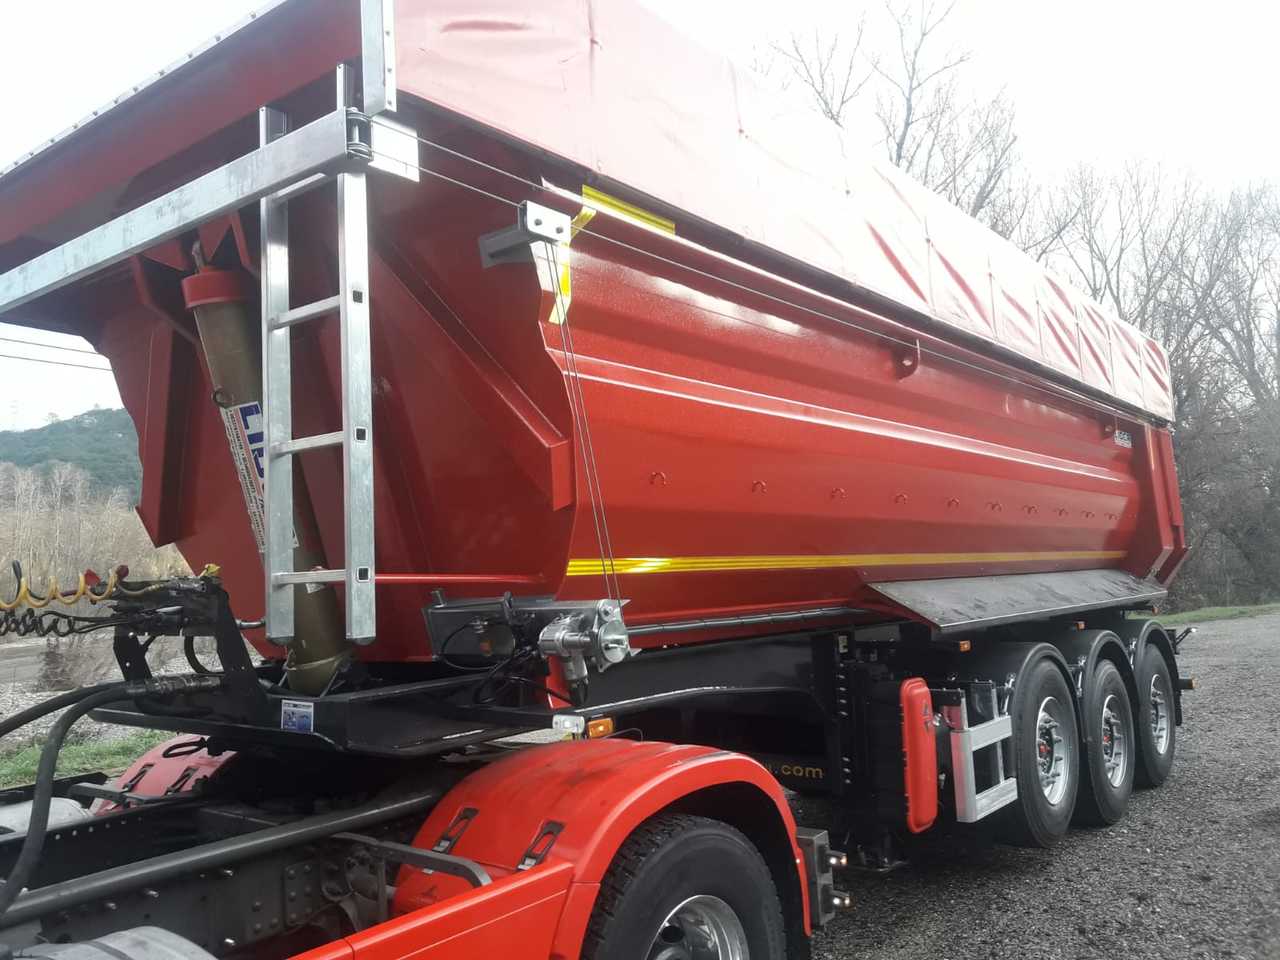 Lease a LIDER 2022 MODELS YEAR NEW (MANUFACTURER COMPANY LIDER TRAILER & TANKER LIDER 2022 MODELS YEAR NEW (MANUFACTURER COMPANY LIDER TRAILER & TANKER: picture 3